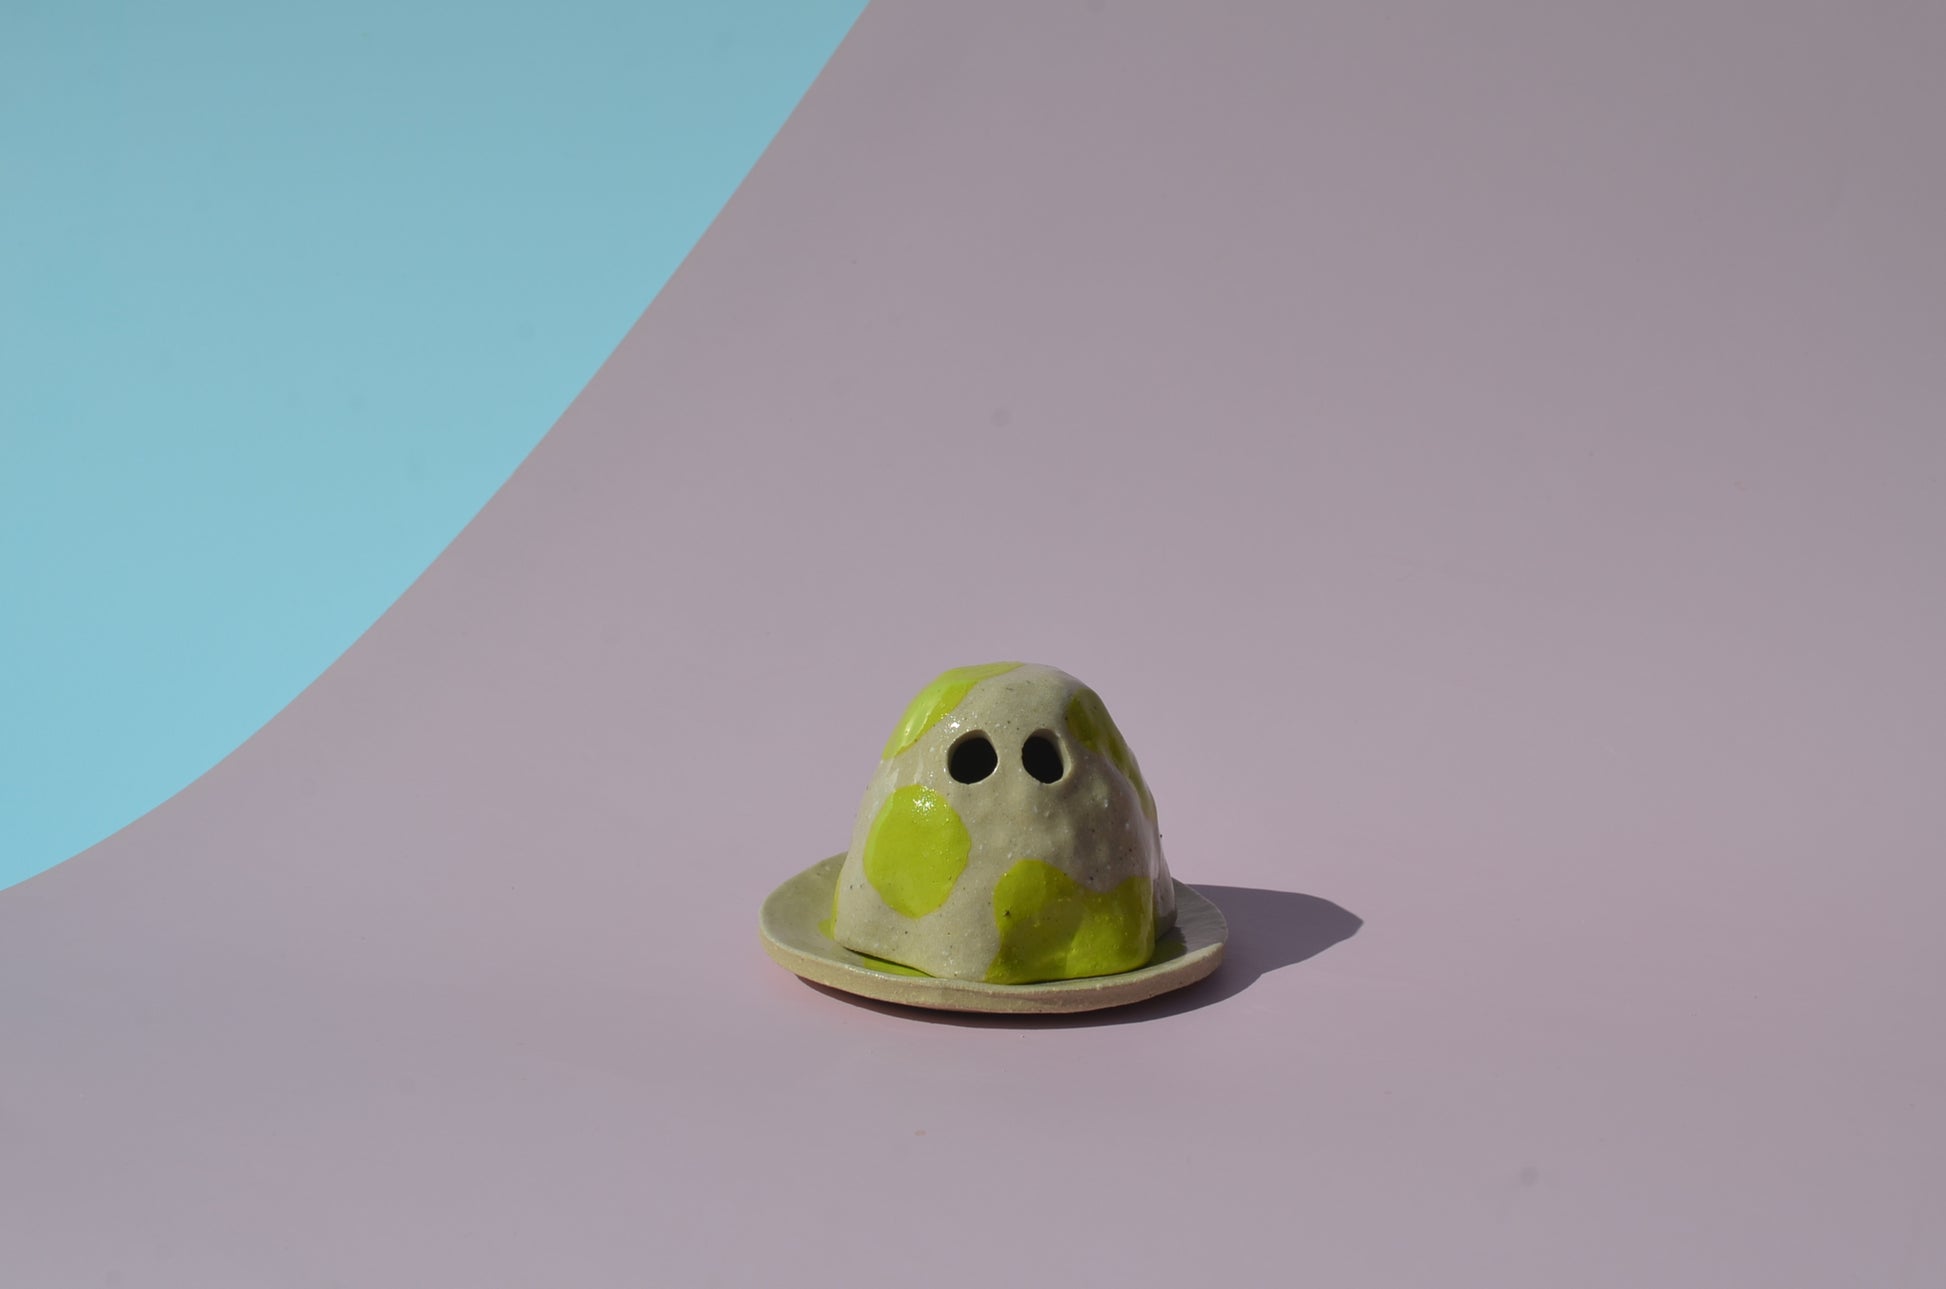 Picture of a handmade ghost figurine with its eyes carved out, sitting on a small round tray and painted in a lime green cow spot design.